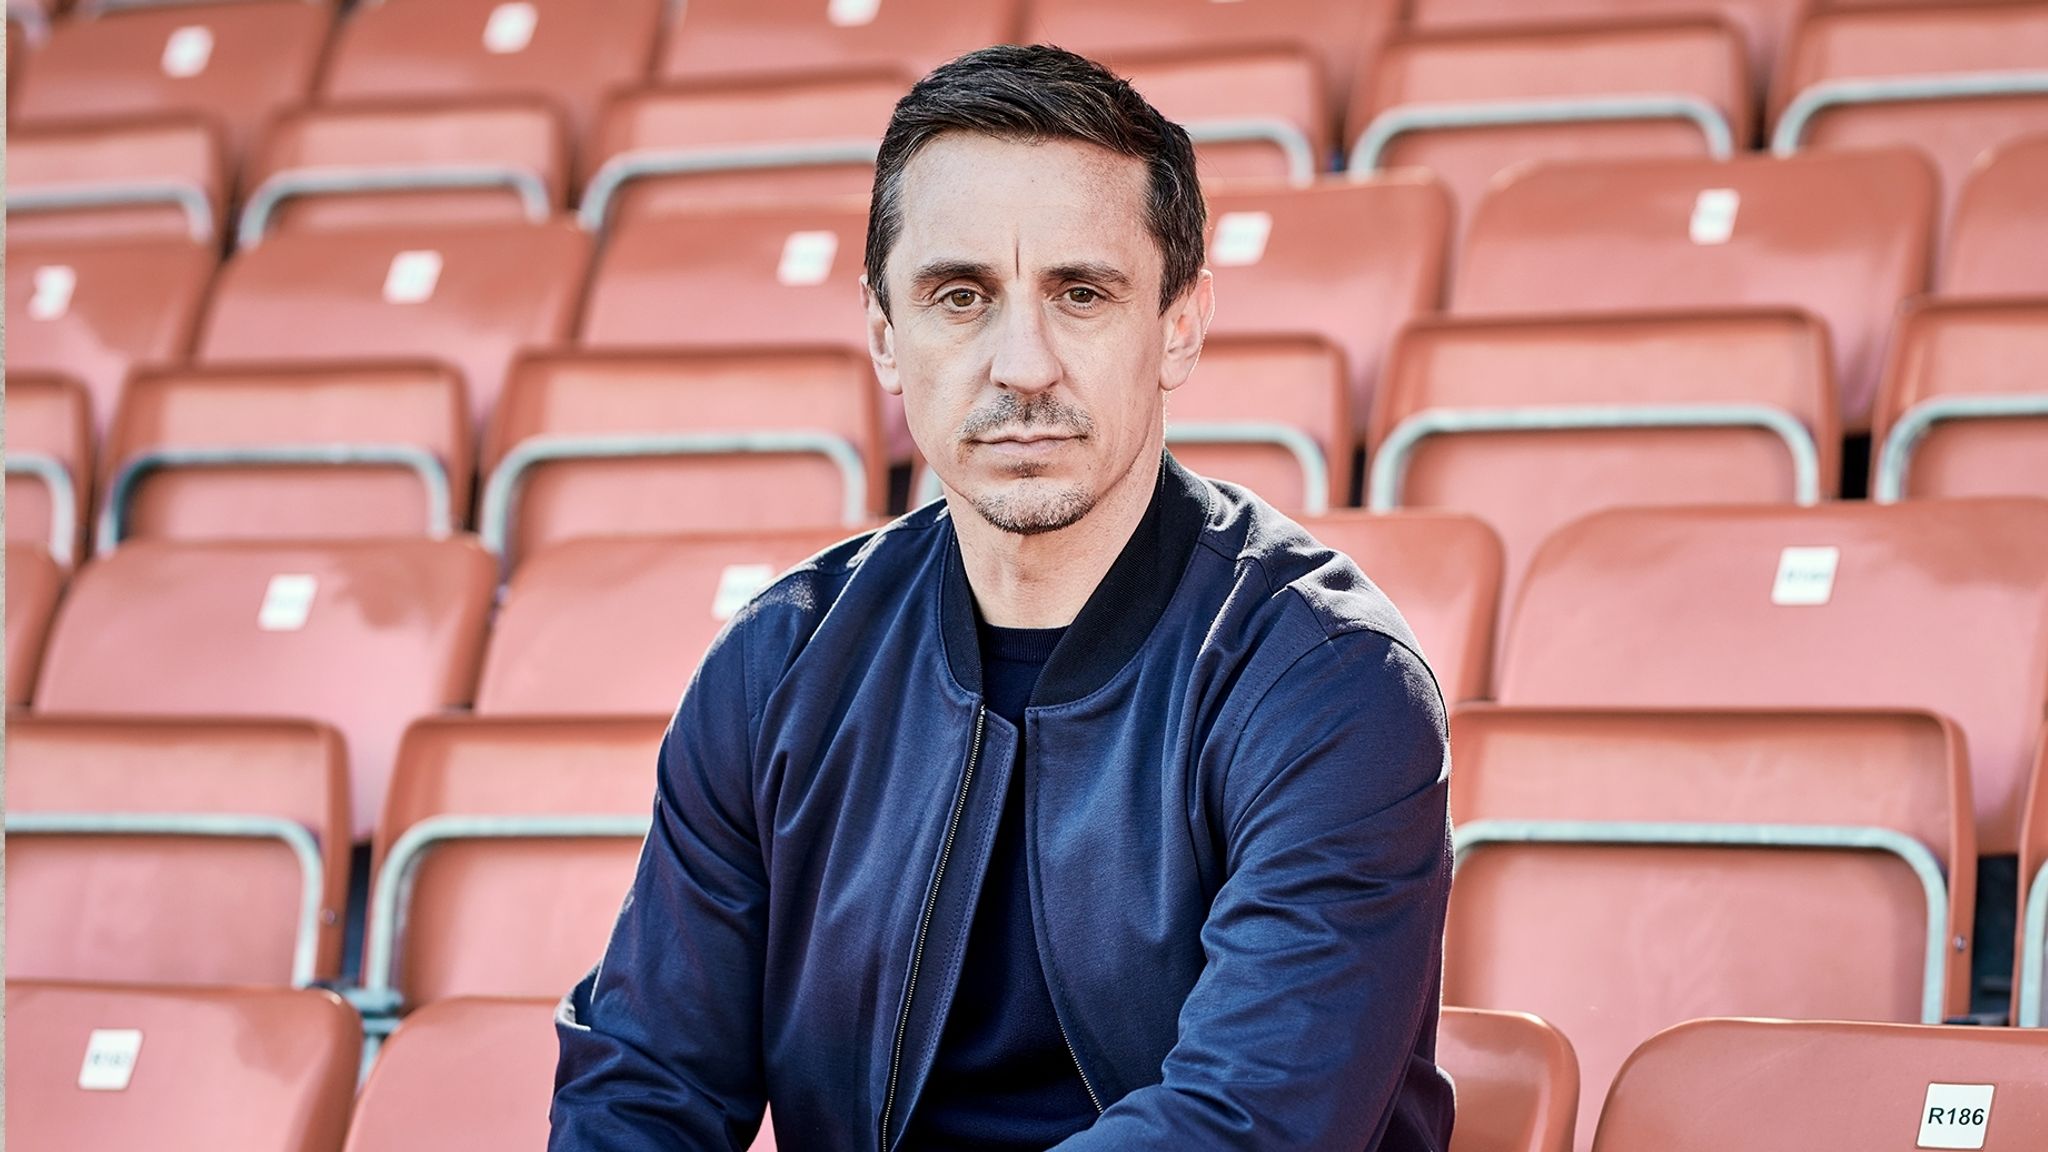 Gary Neville exclusive interview: On the 'attempted murder' of English football and his vision for a better game | Football News | Sky Sports